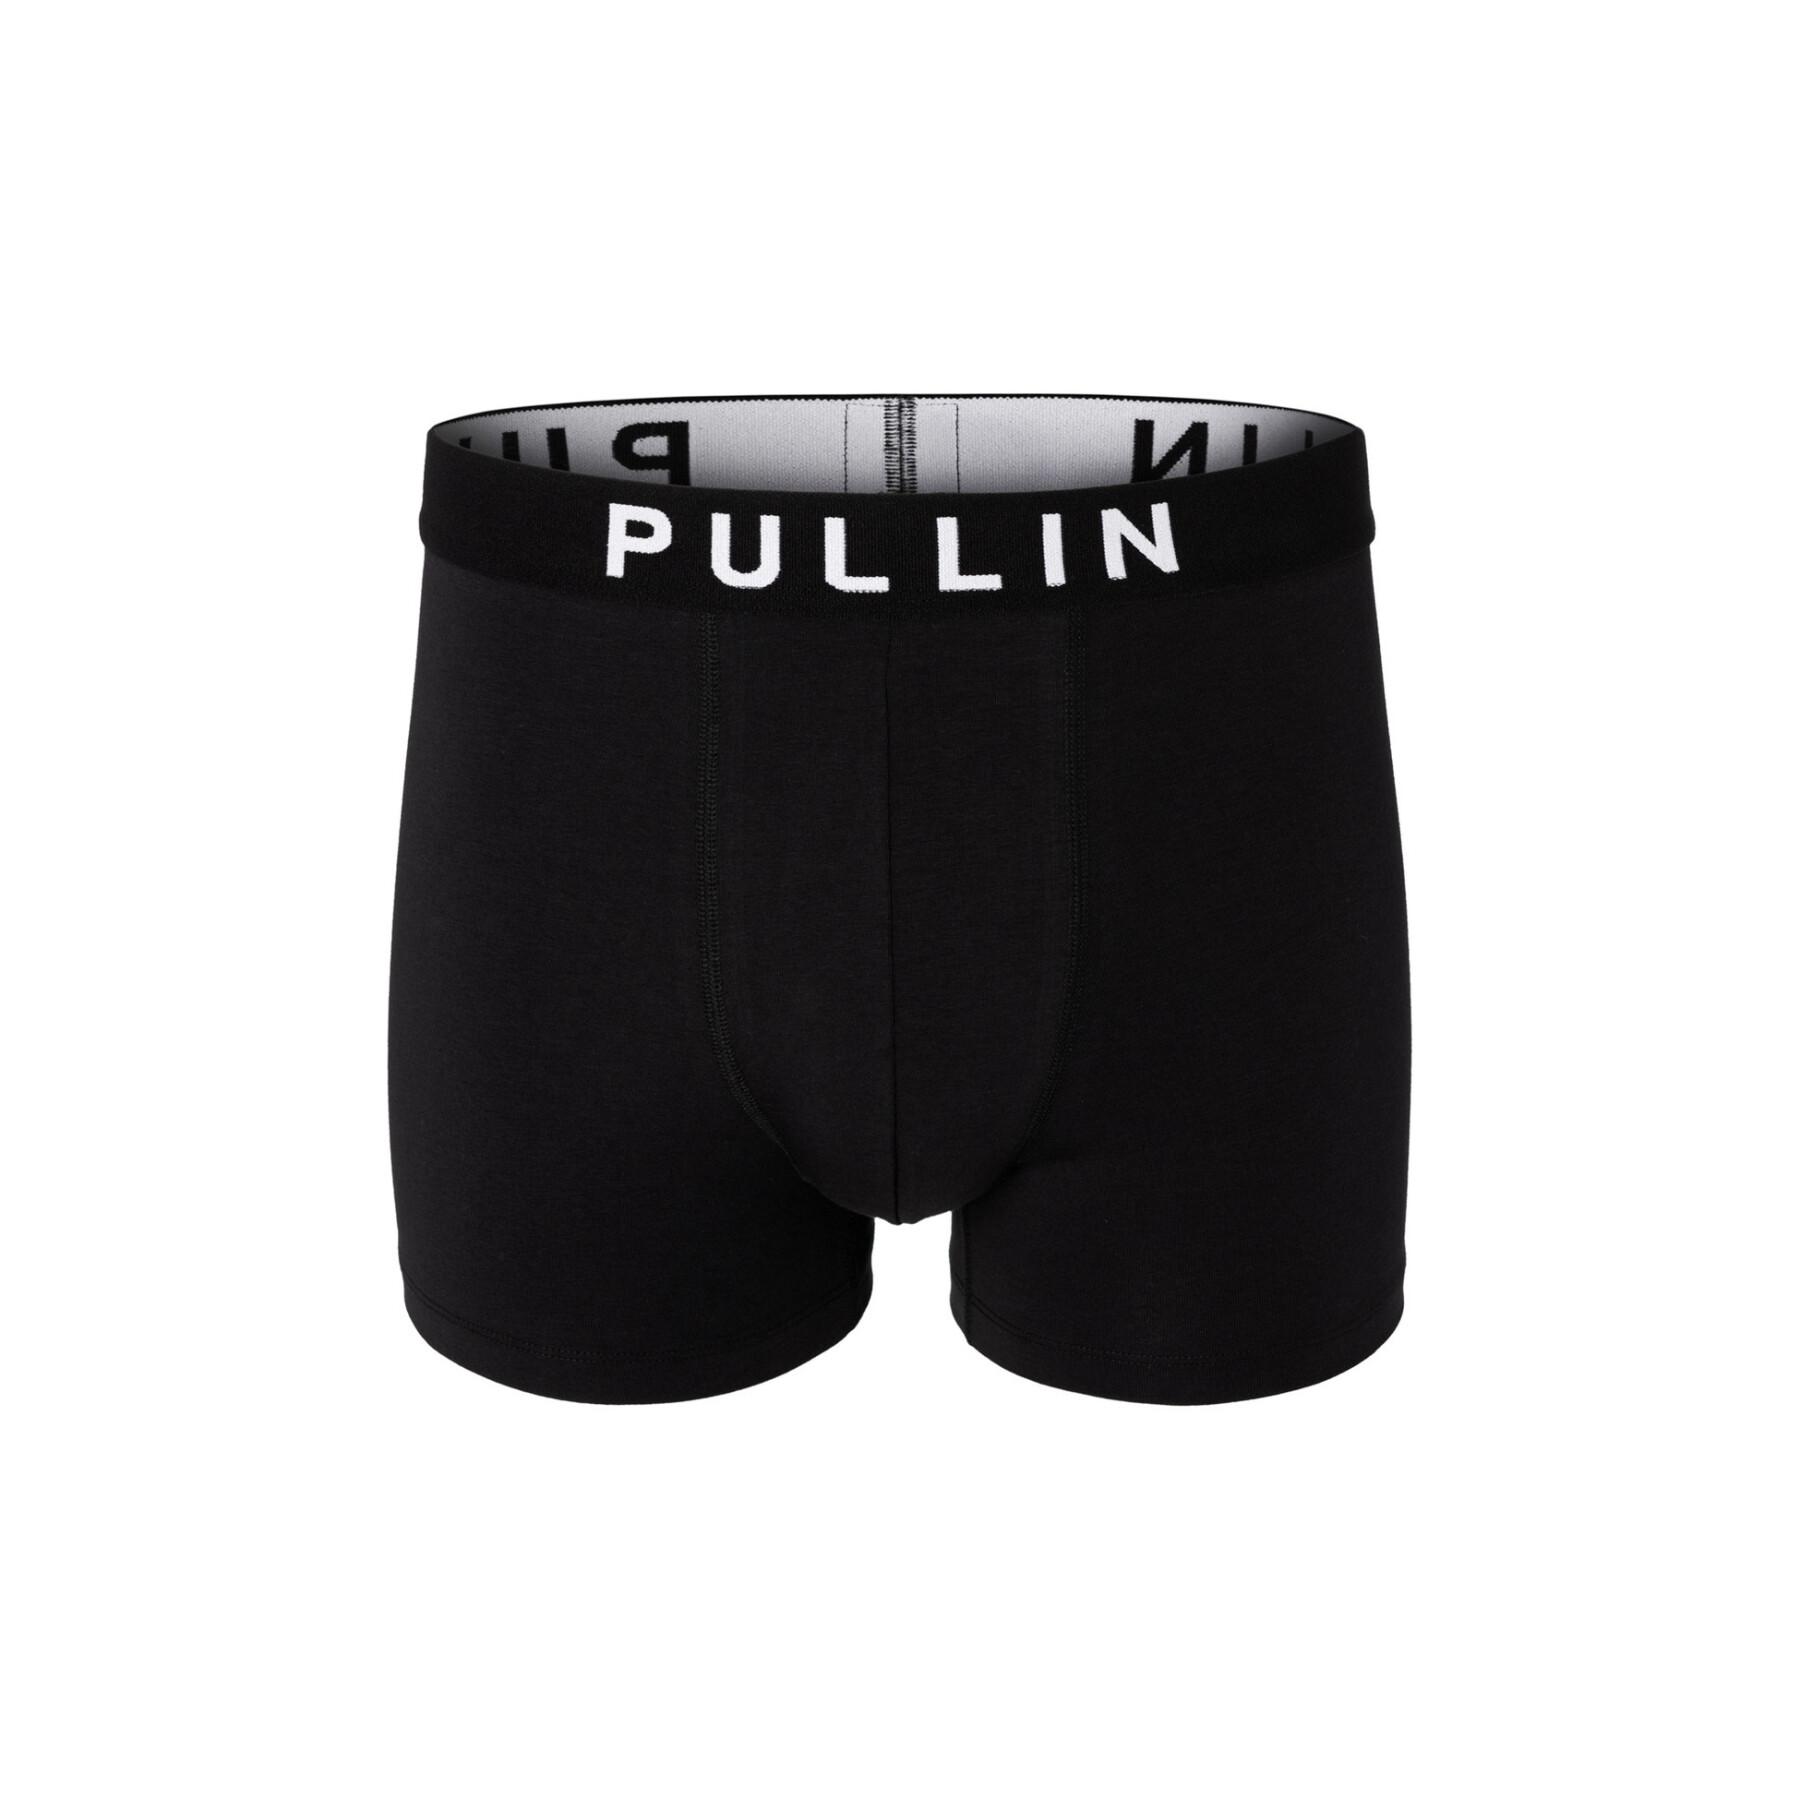 Cotton boxer shorts Pull-in master